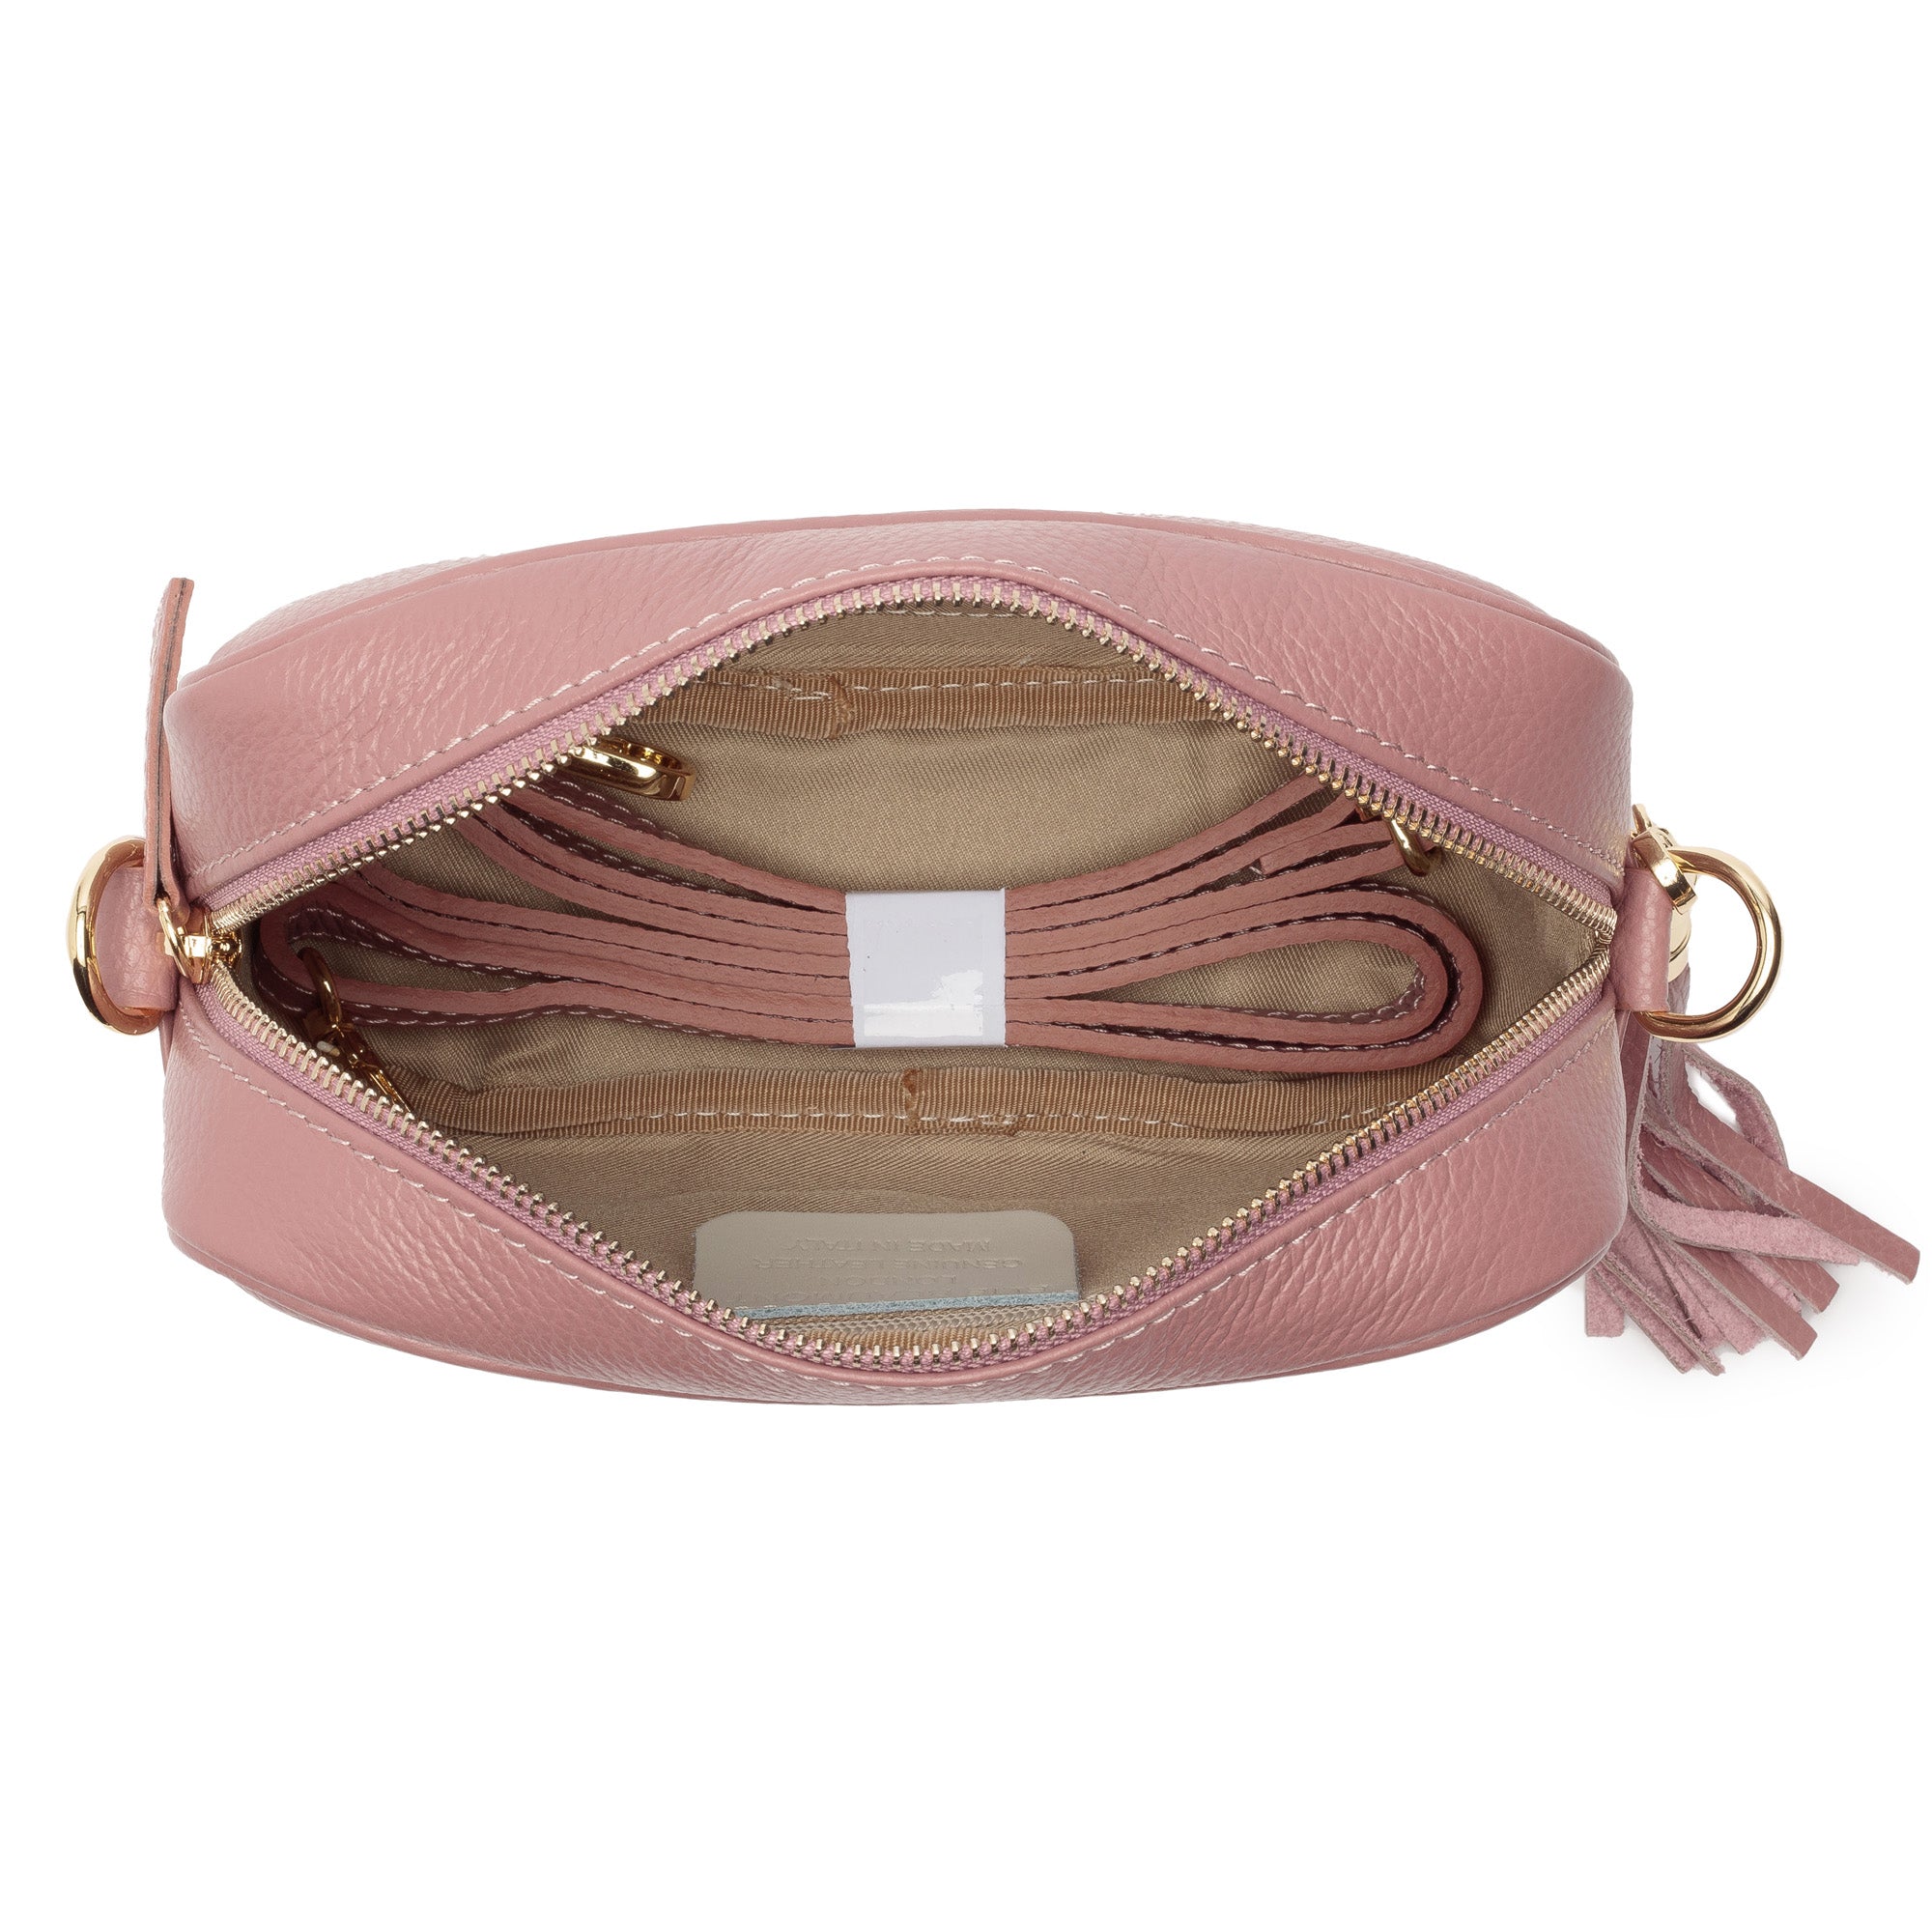 Crossbody Dusty Rose (Pink Camouflage strap)